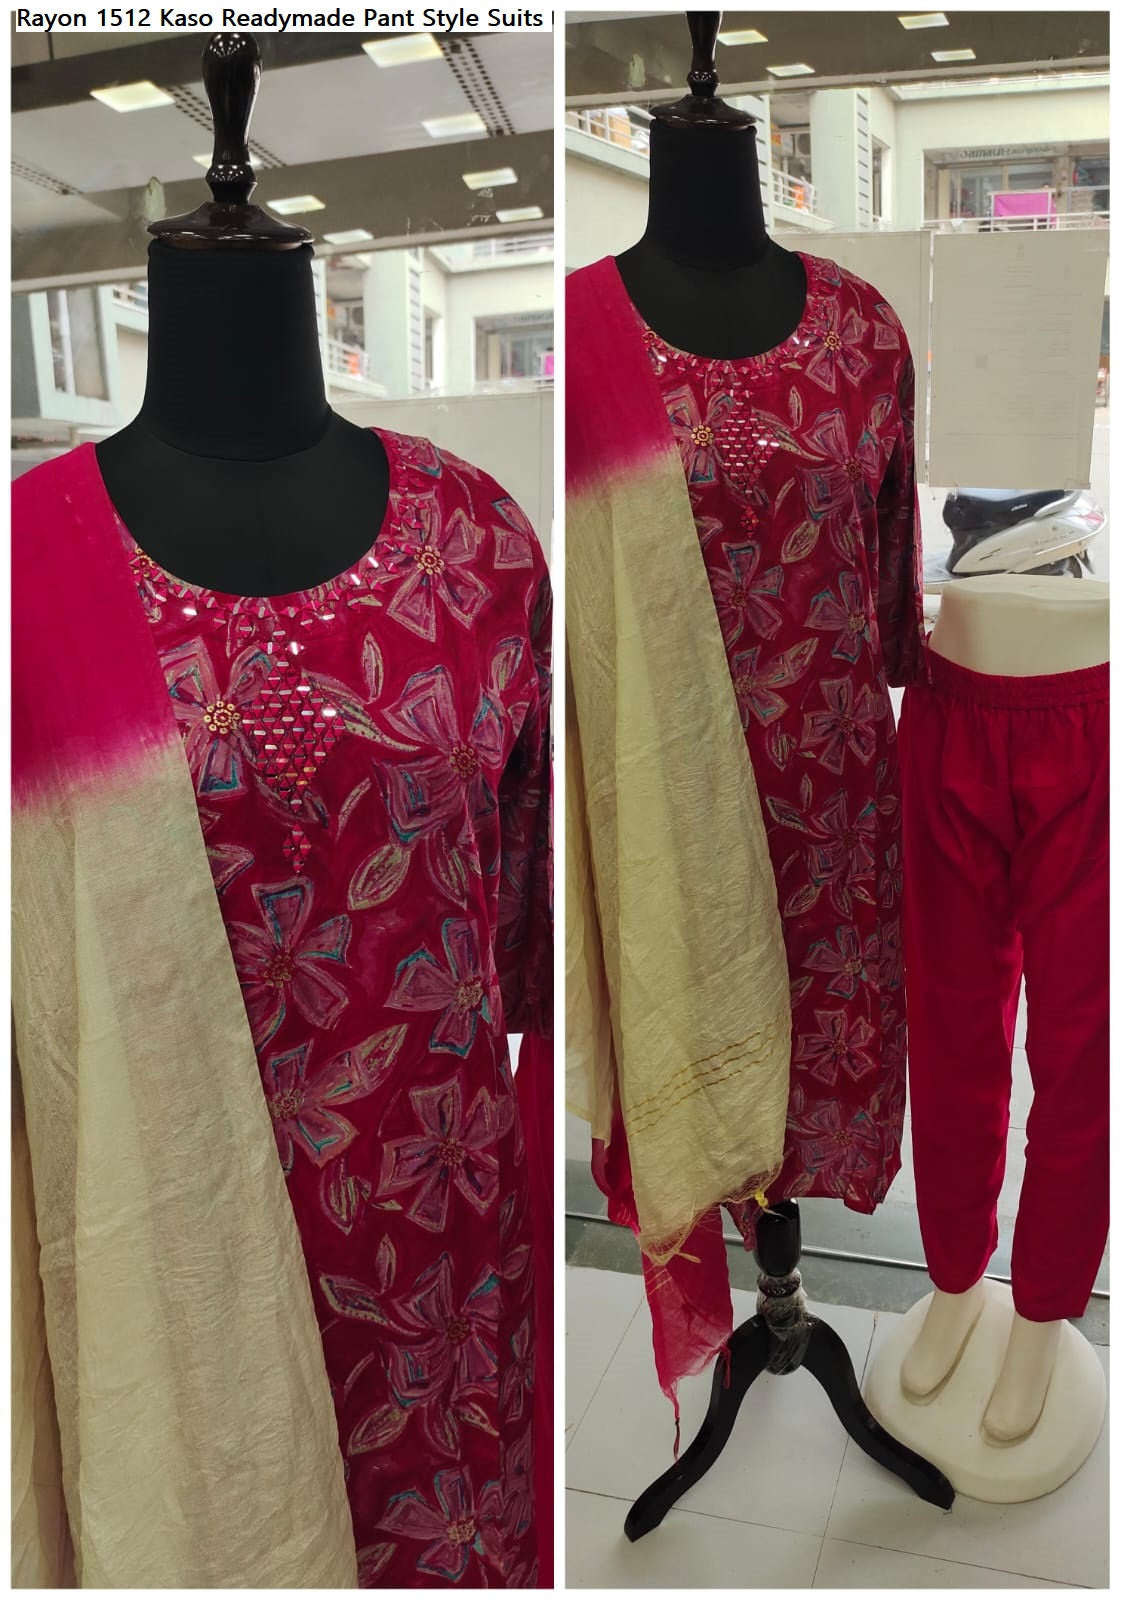 Rayon 1512 Kaso Readymade Pant Style Suits